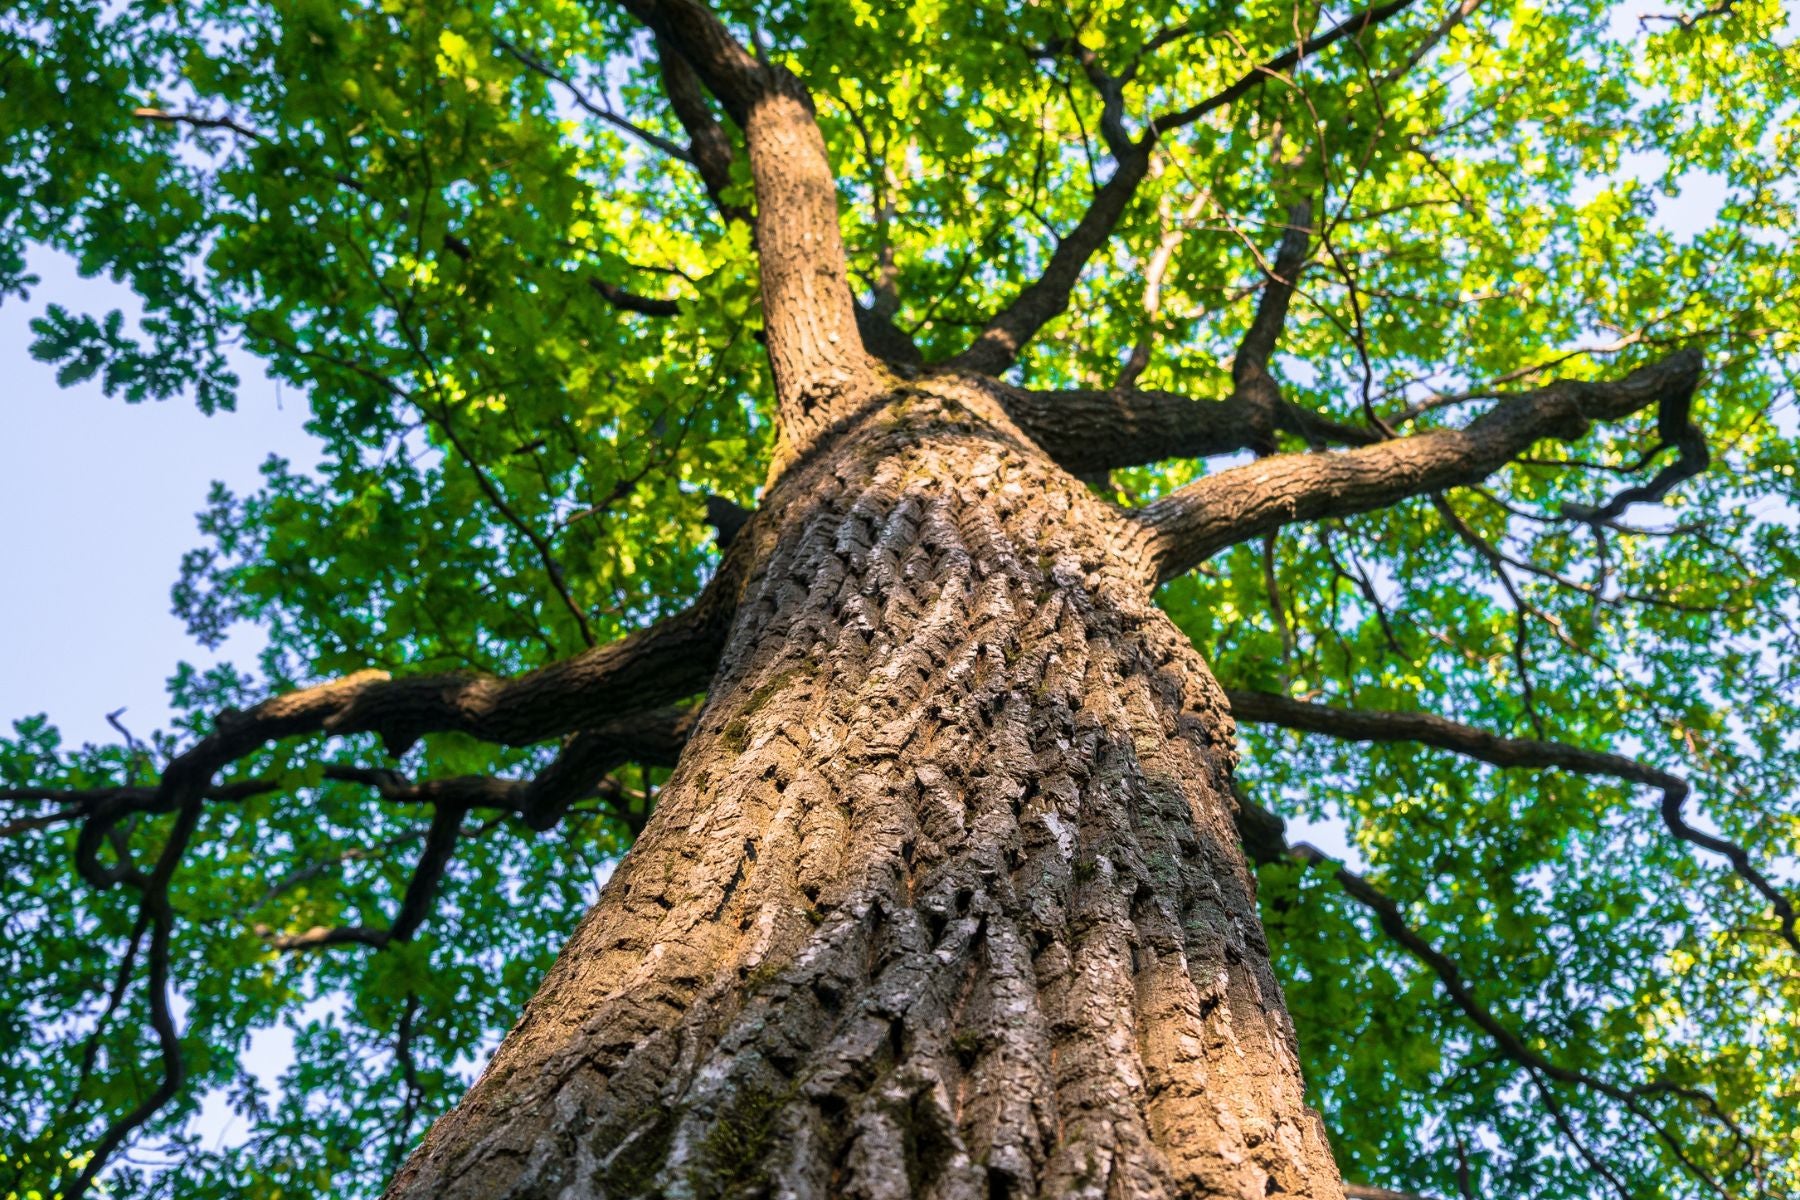 10 Interesting Facts About The Oak Tree  THE ENVIRONMENTOR